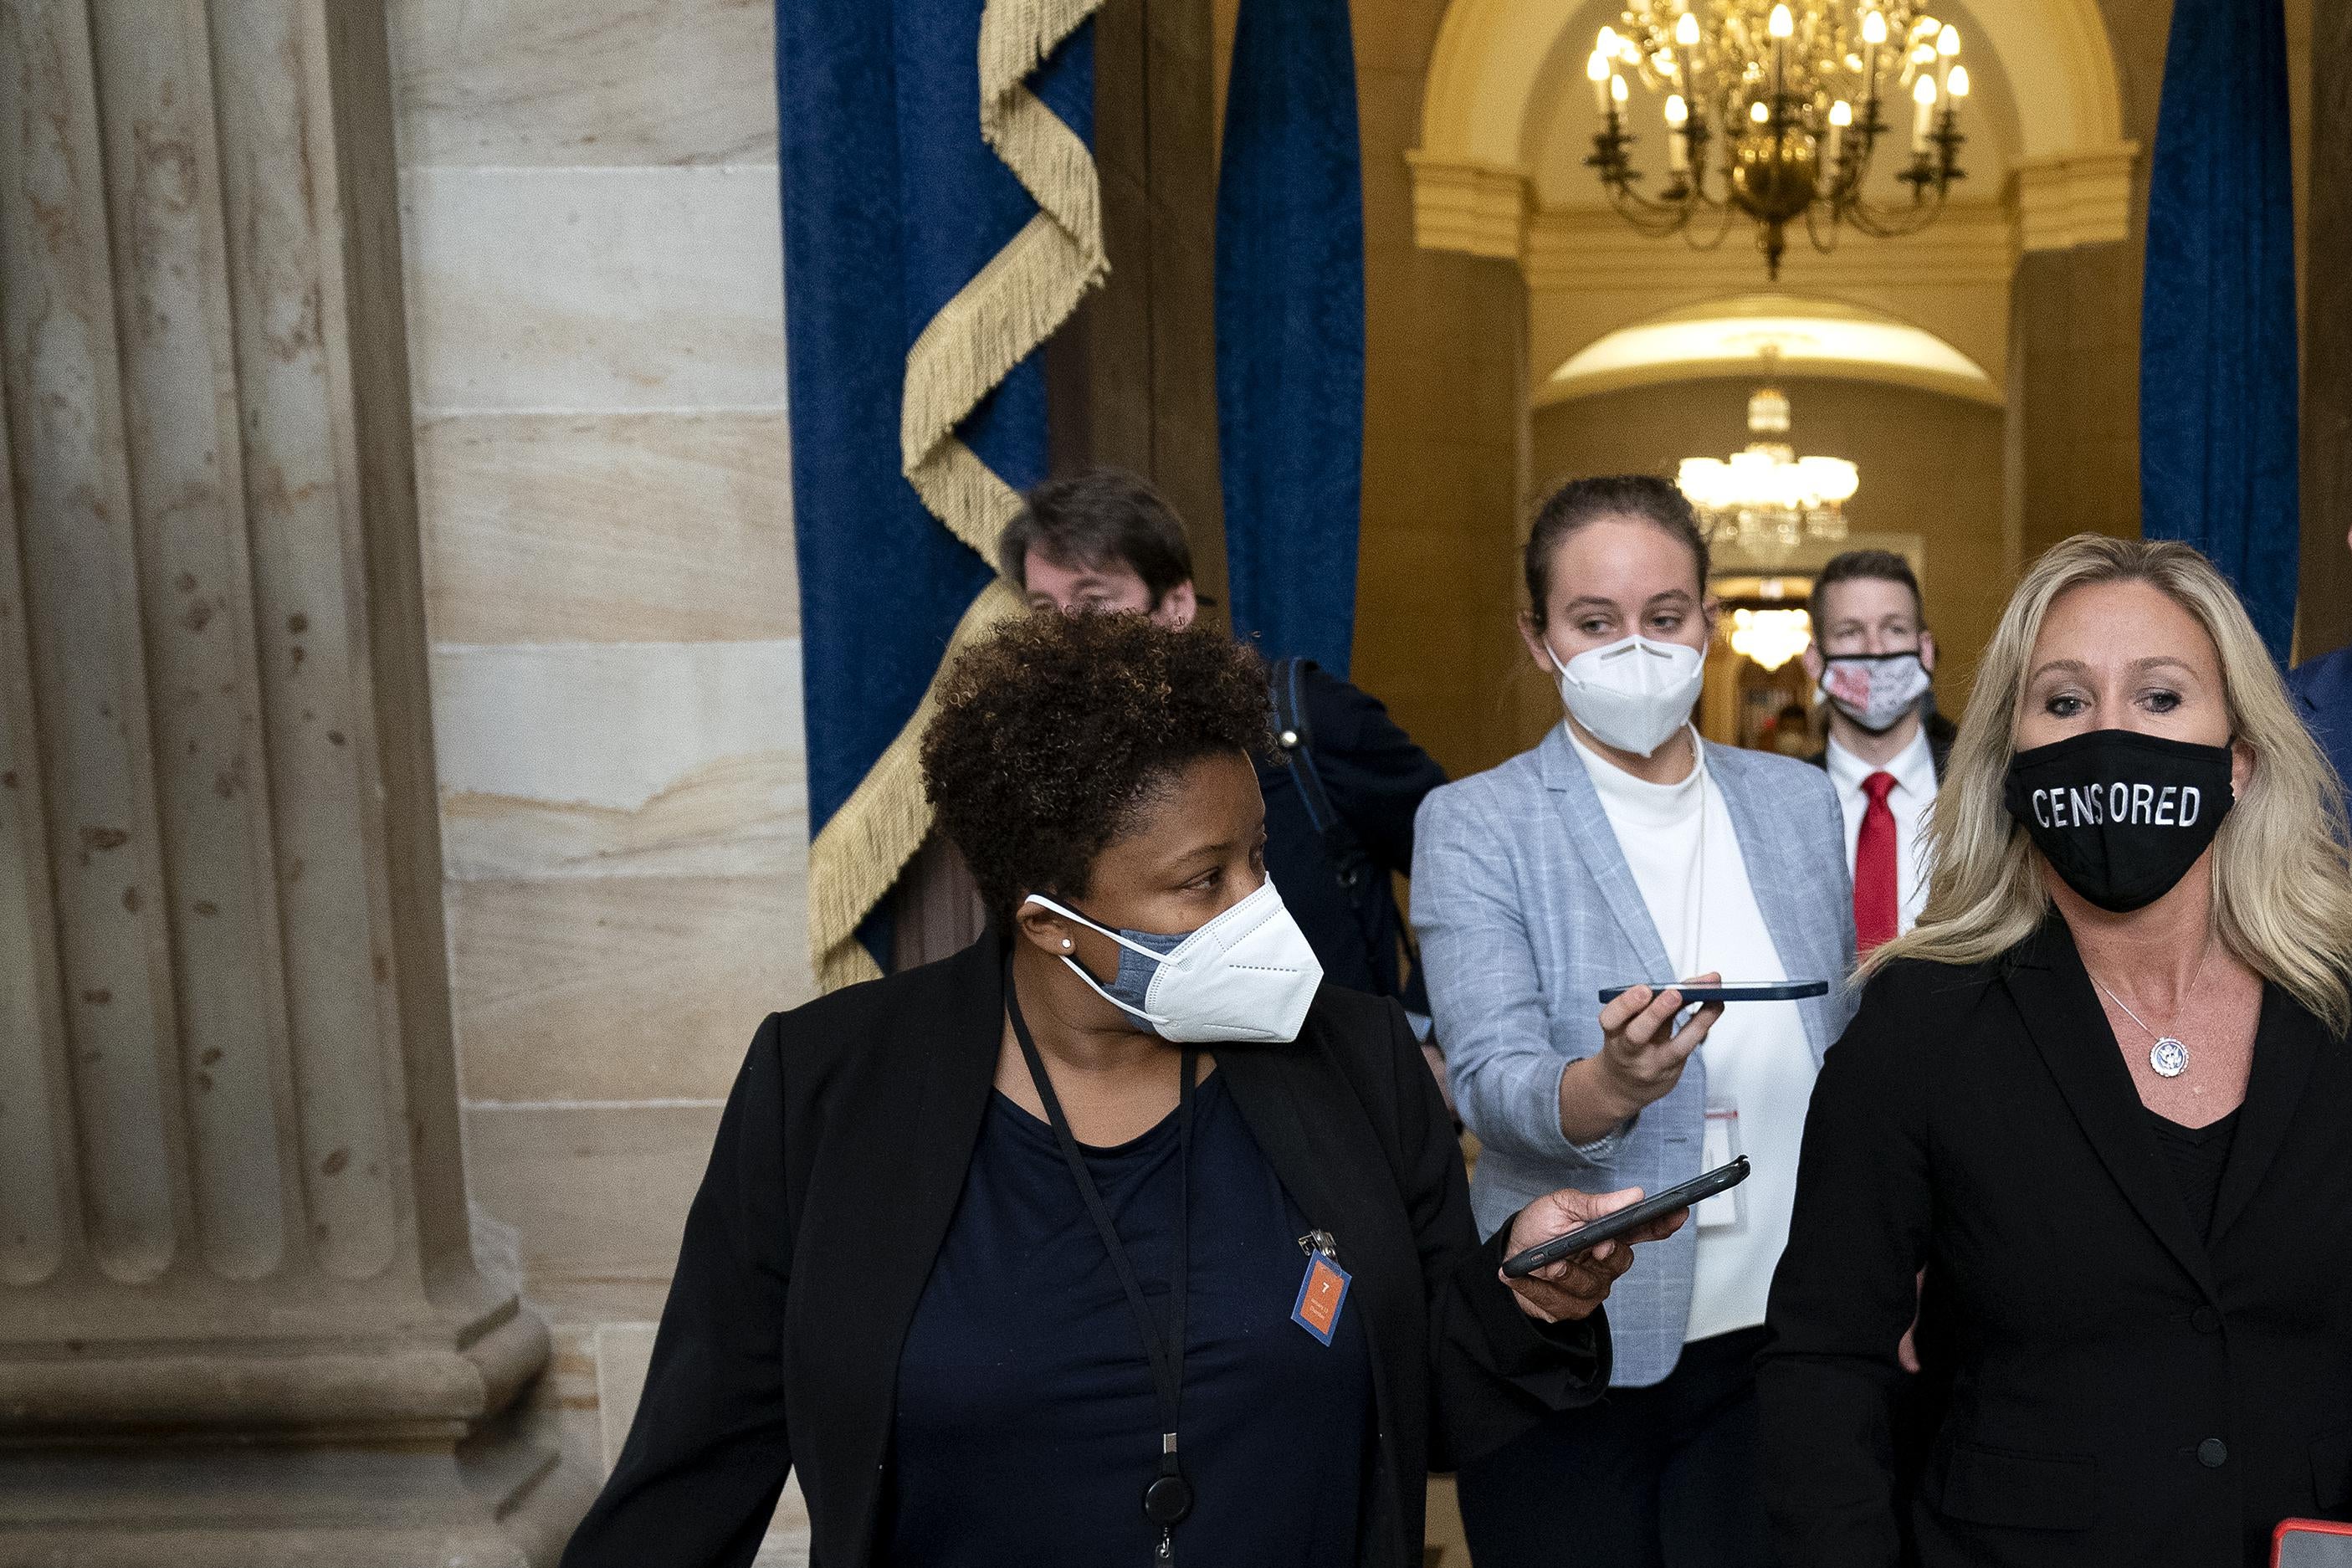 Marjorie Taylor Greene wears a protective mask reading “CENSORED” while walking with others in the Capitol.